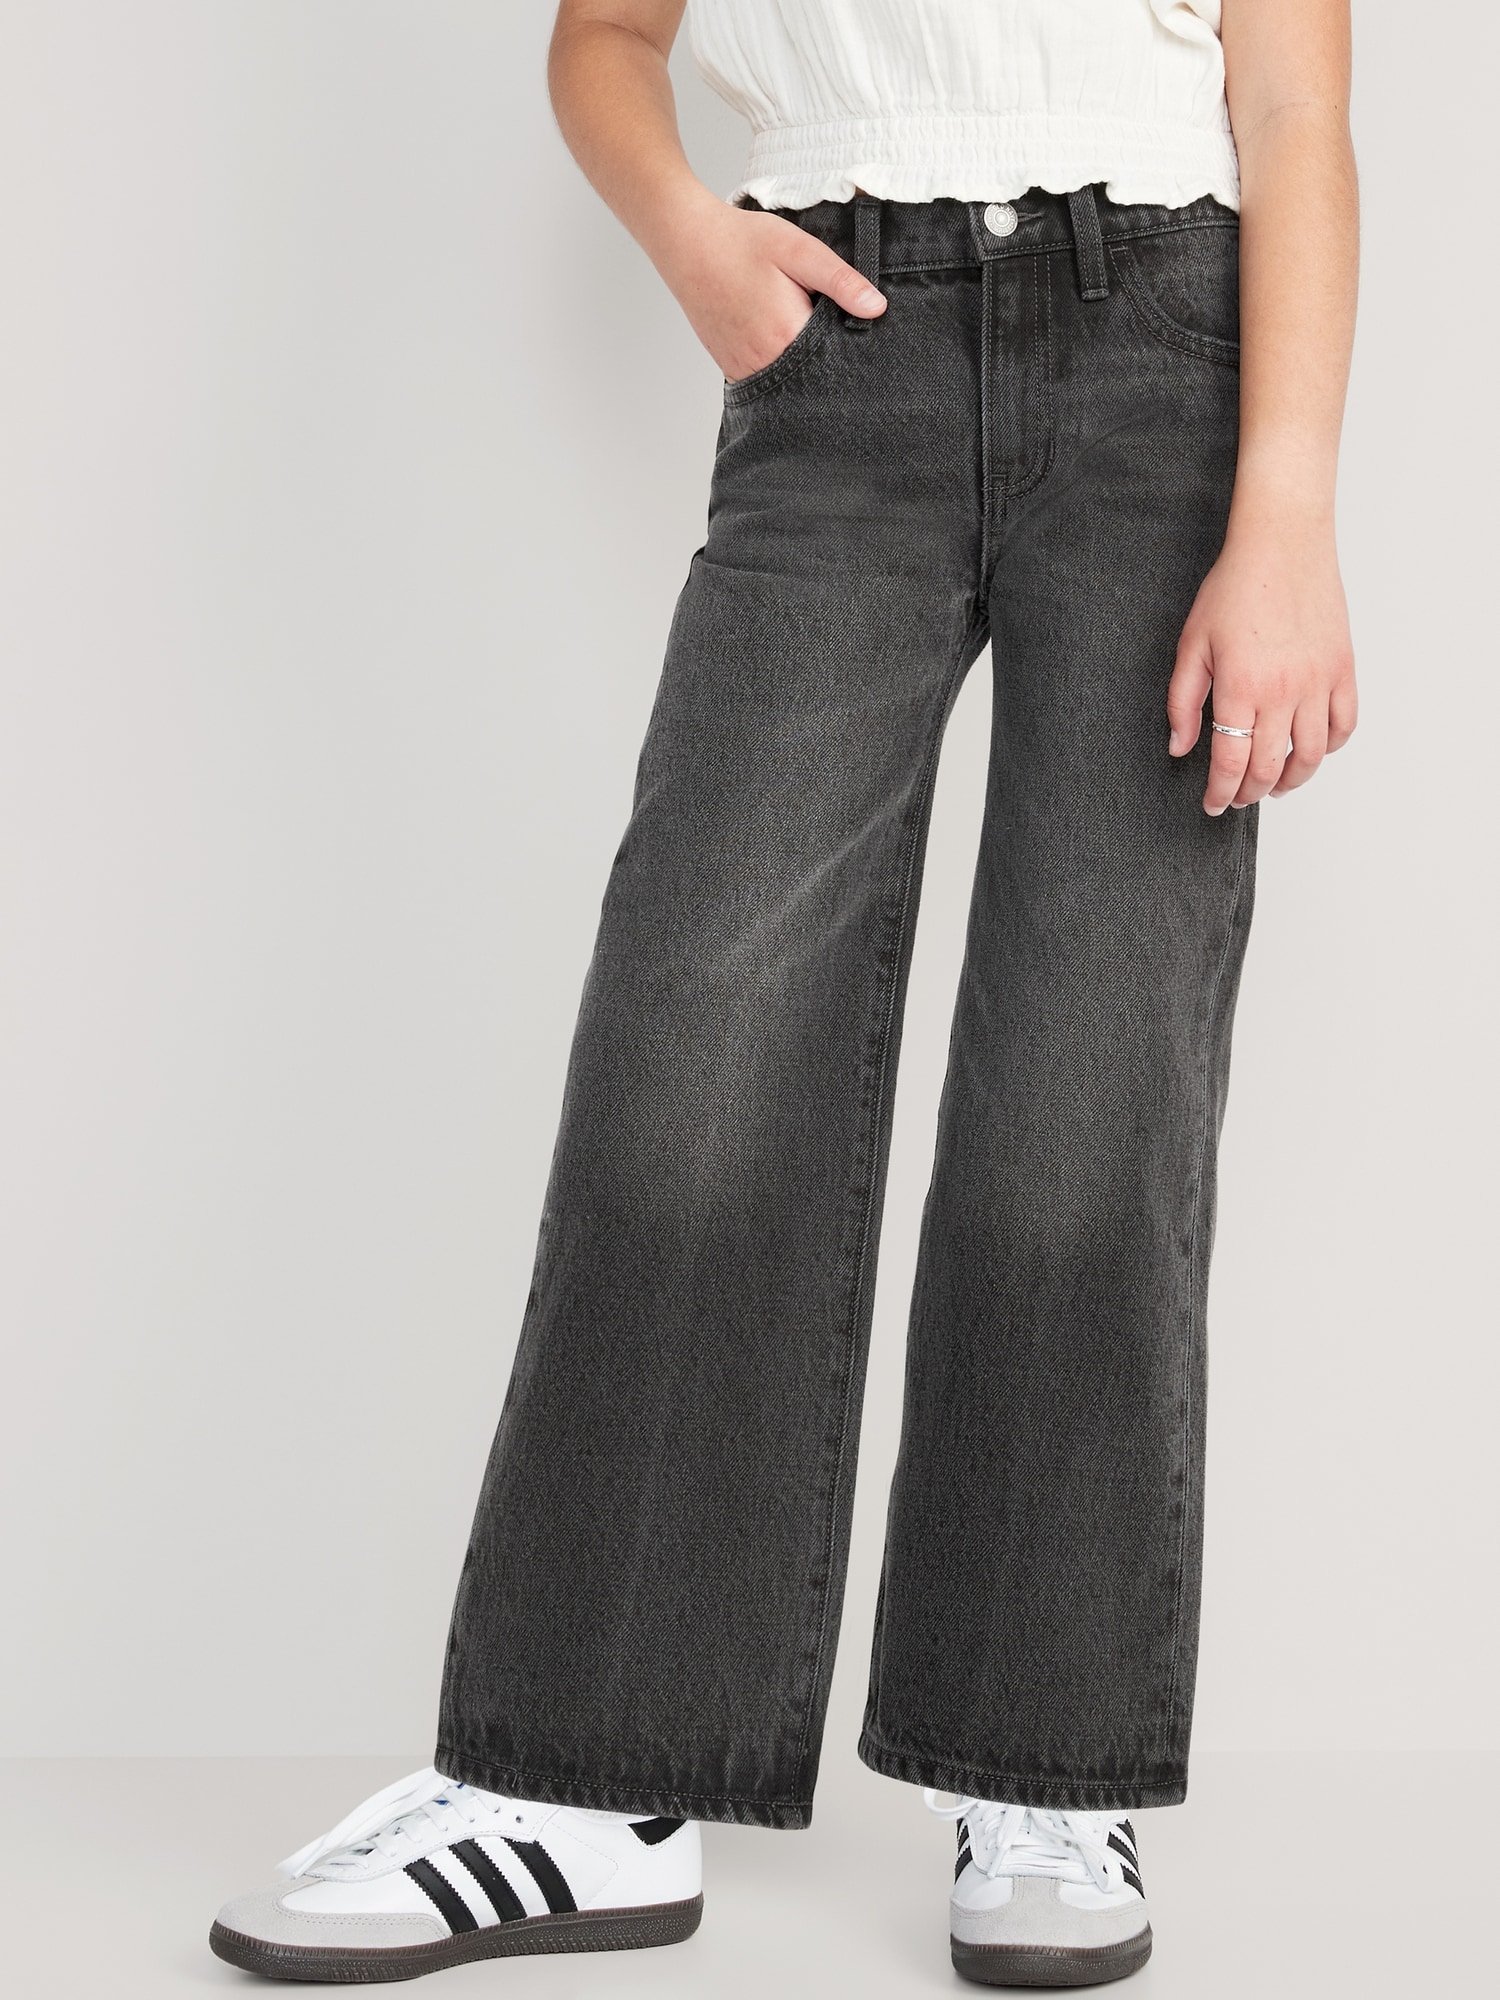 High-Waisted Baggy Wide-Leg Cargo Jeans for Girls